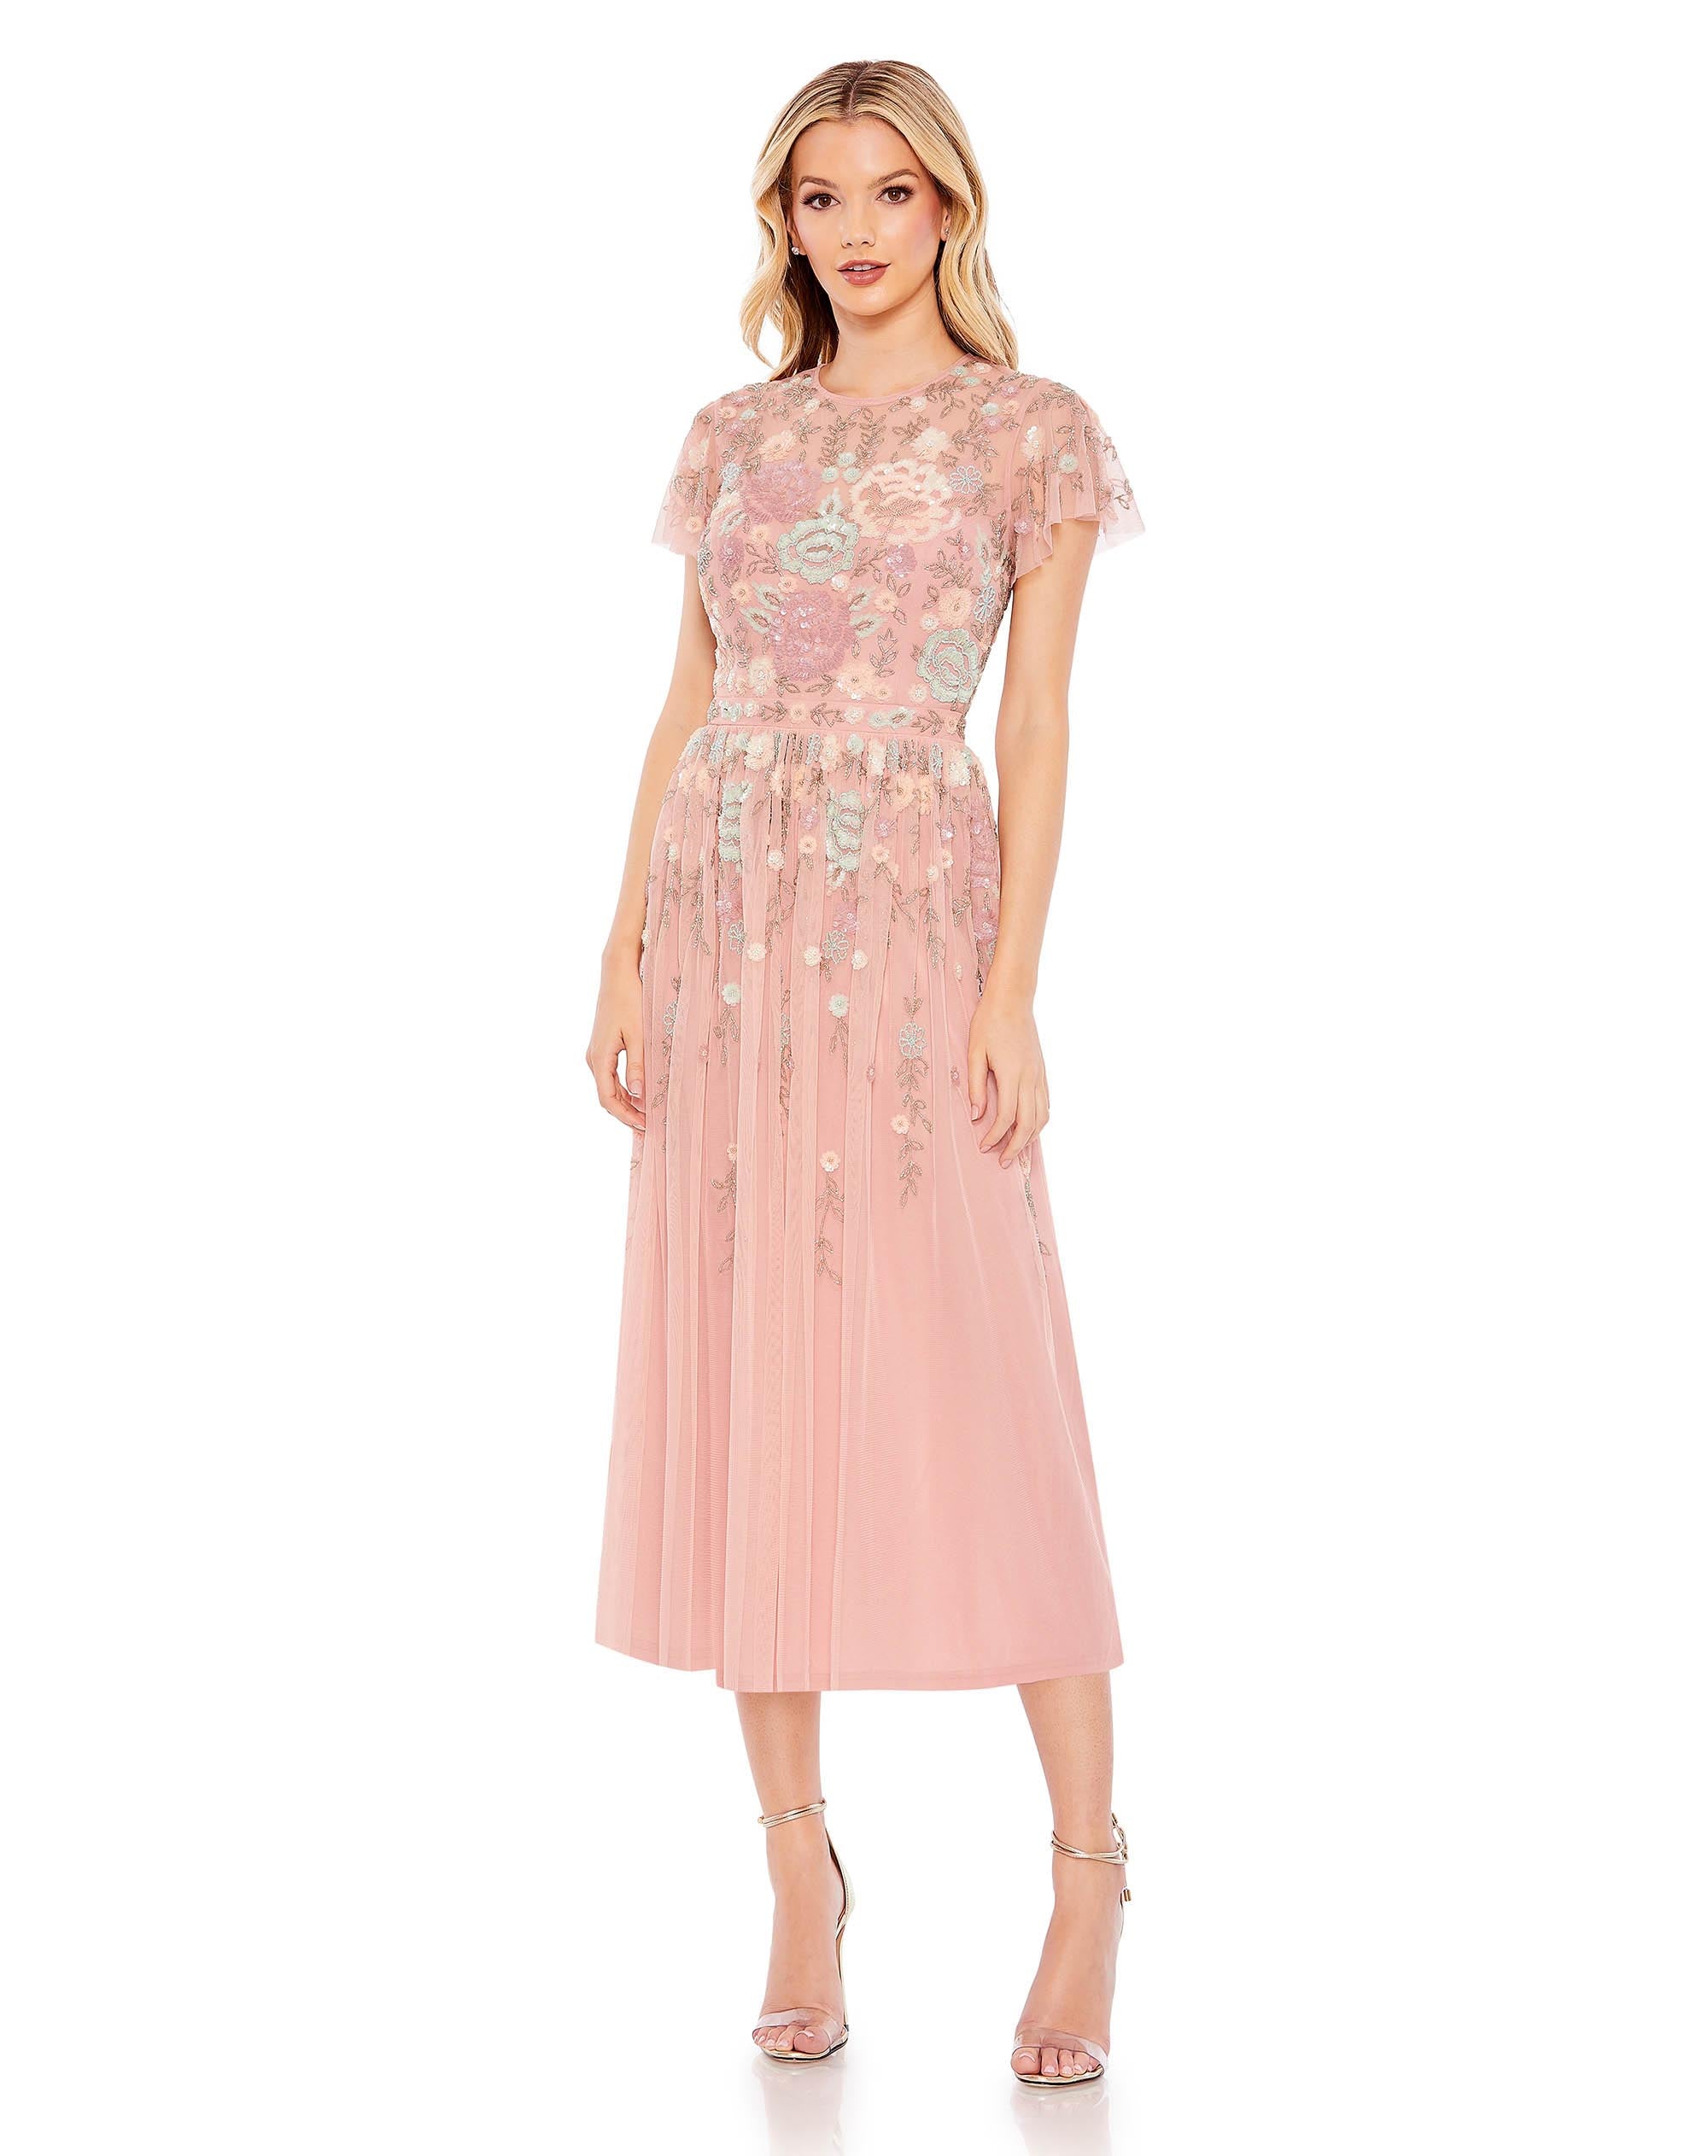 Embellished Illusion High Neck Butterfly Sleeve Midi Dress